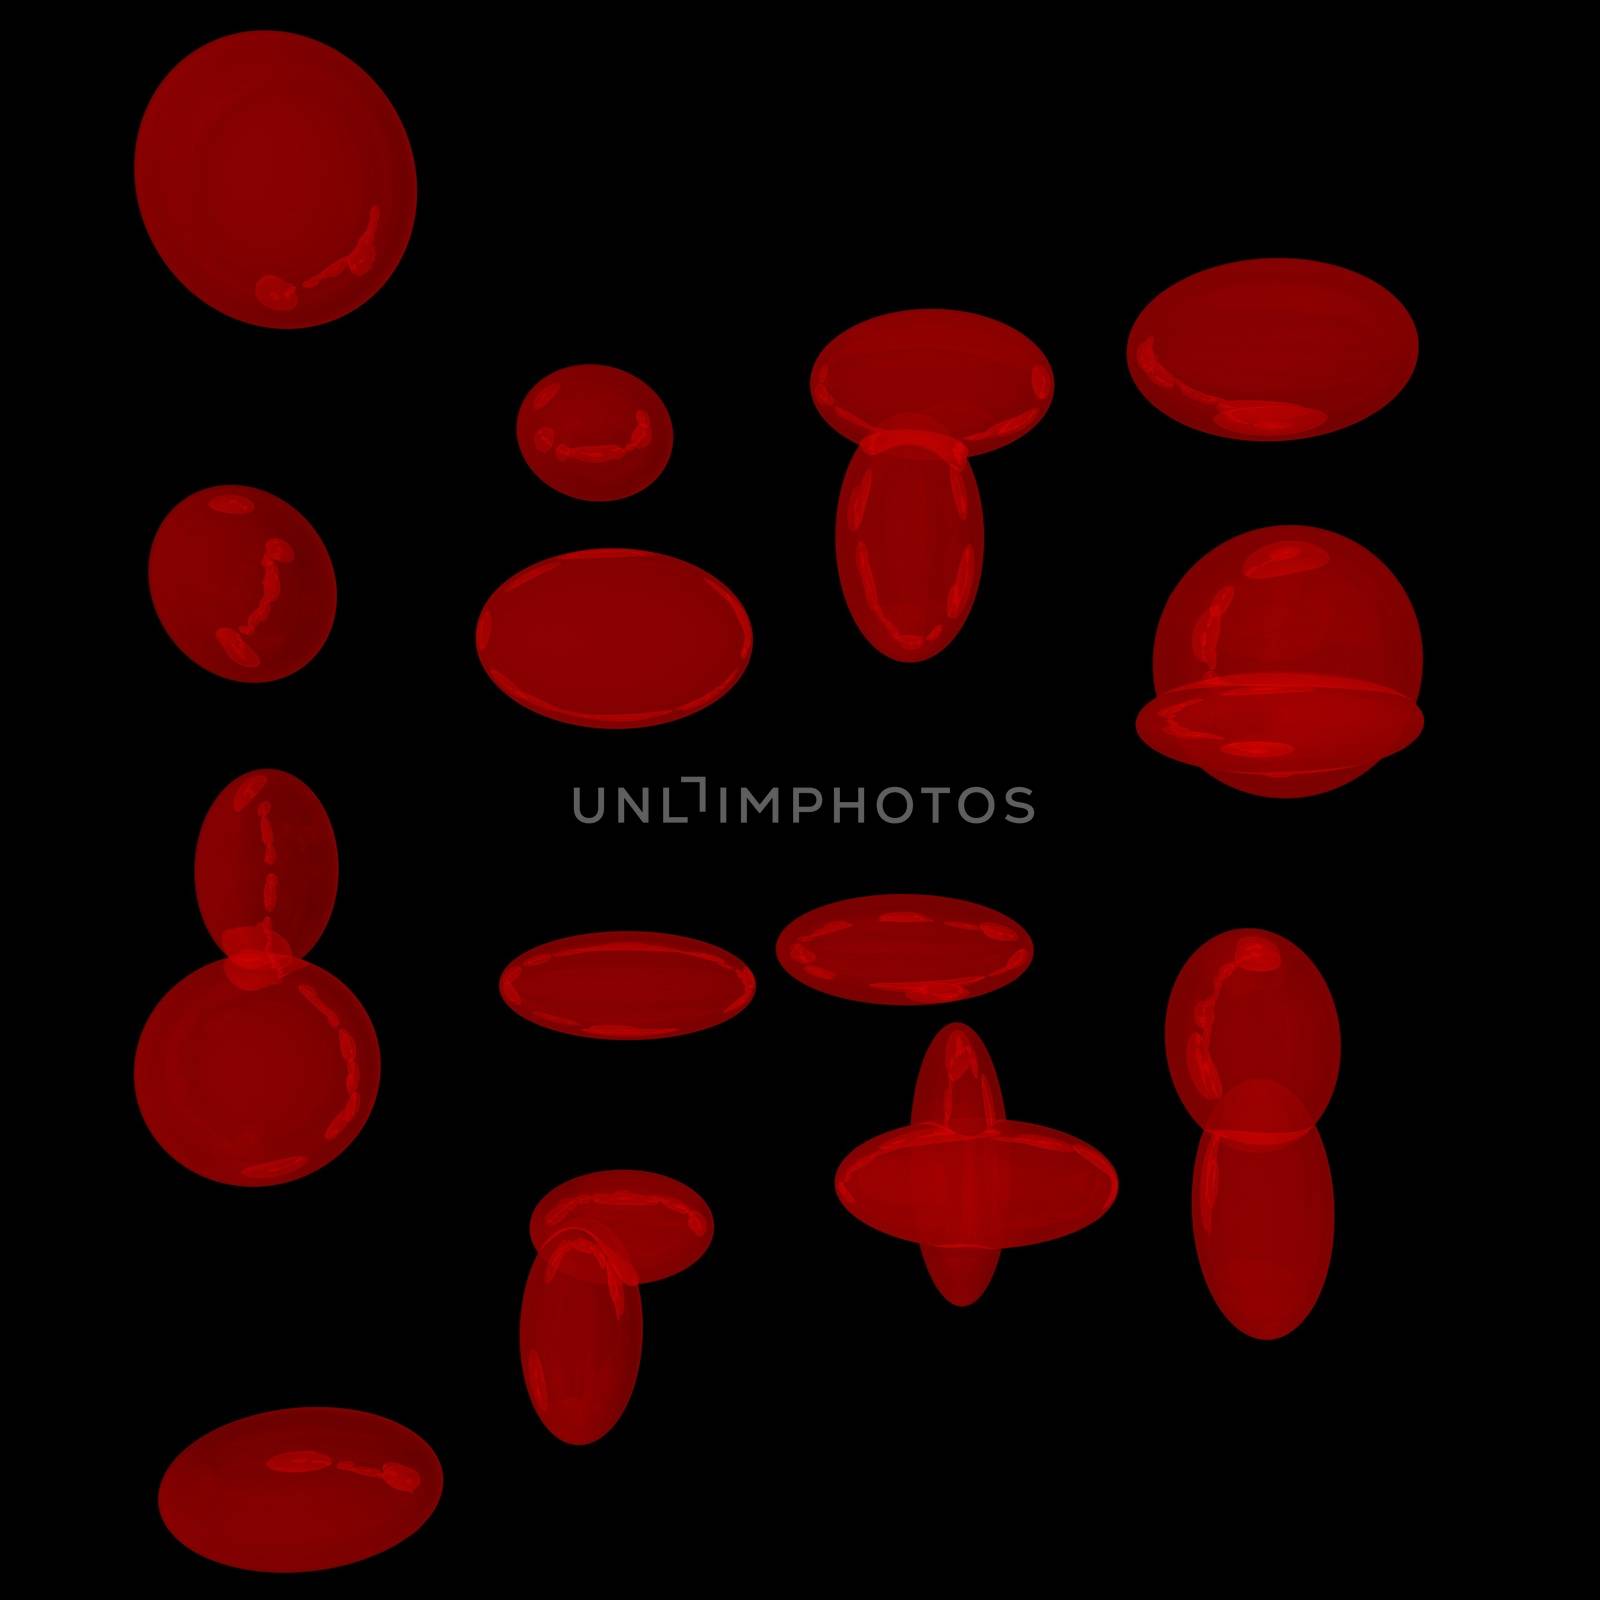 Red particles in black background, 3d render